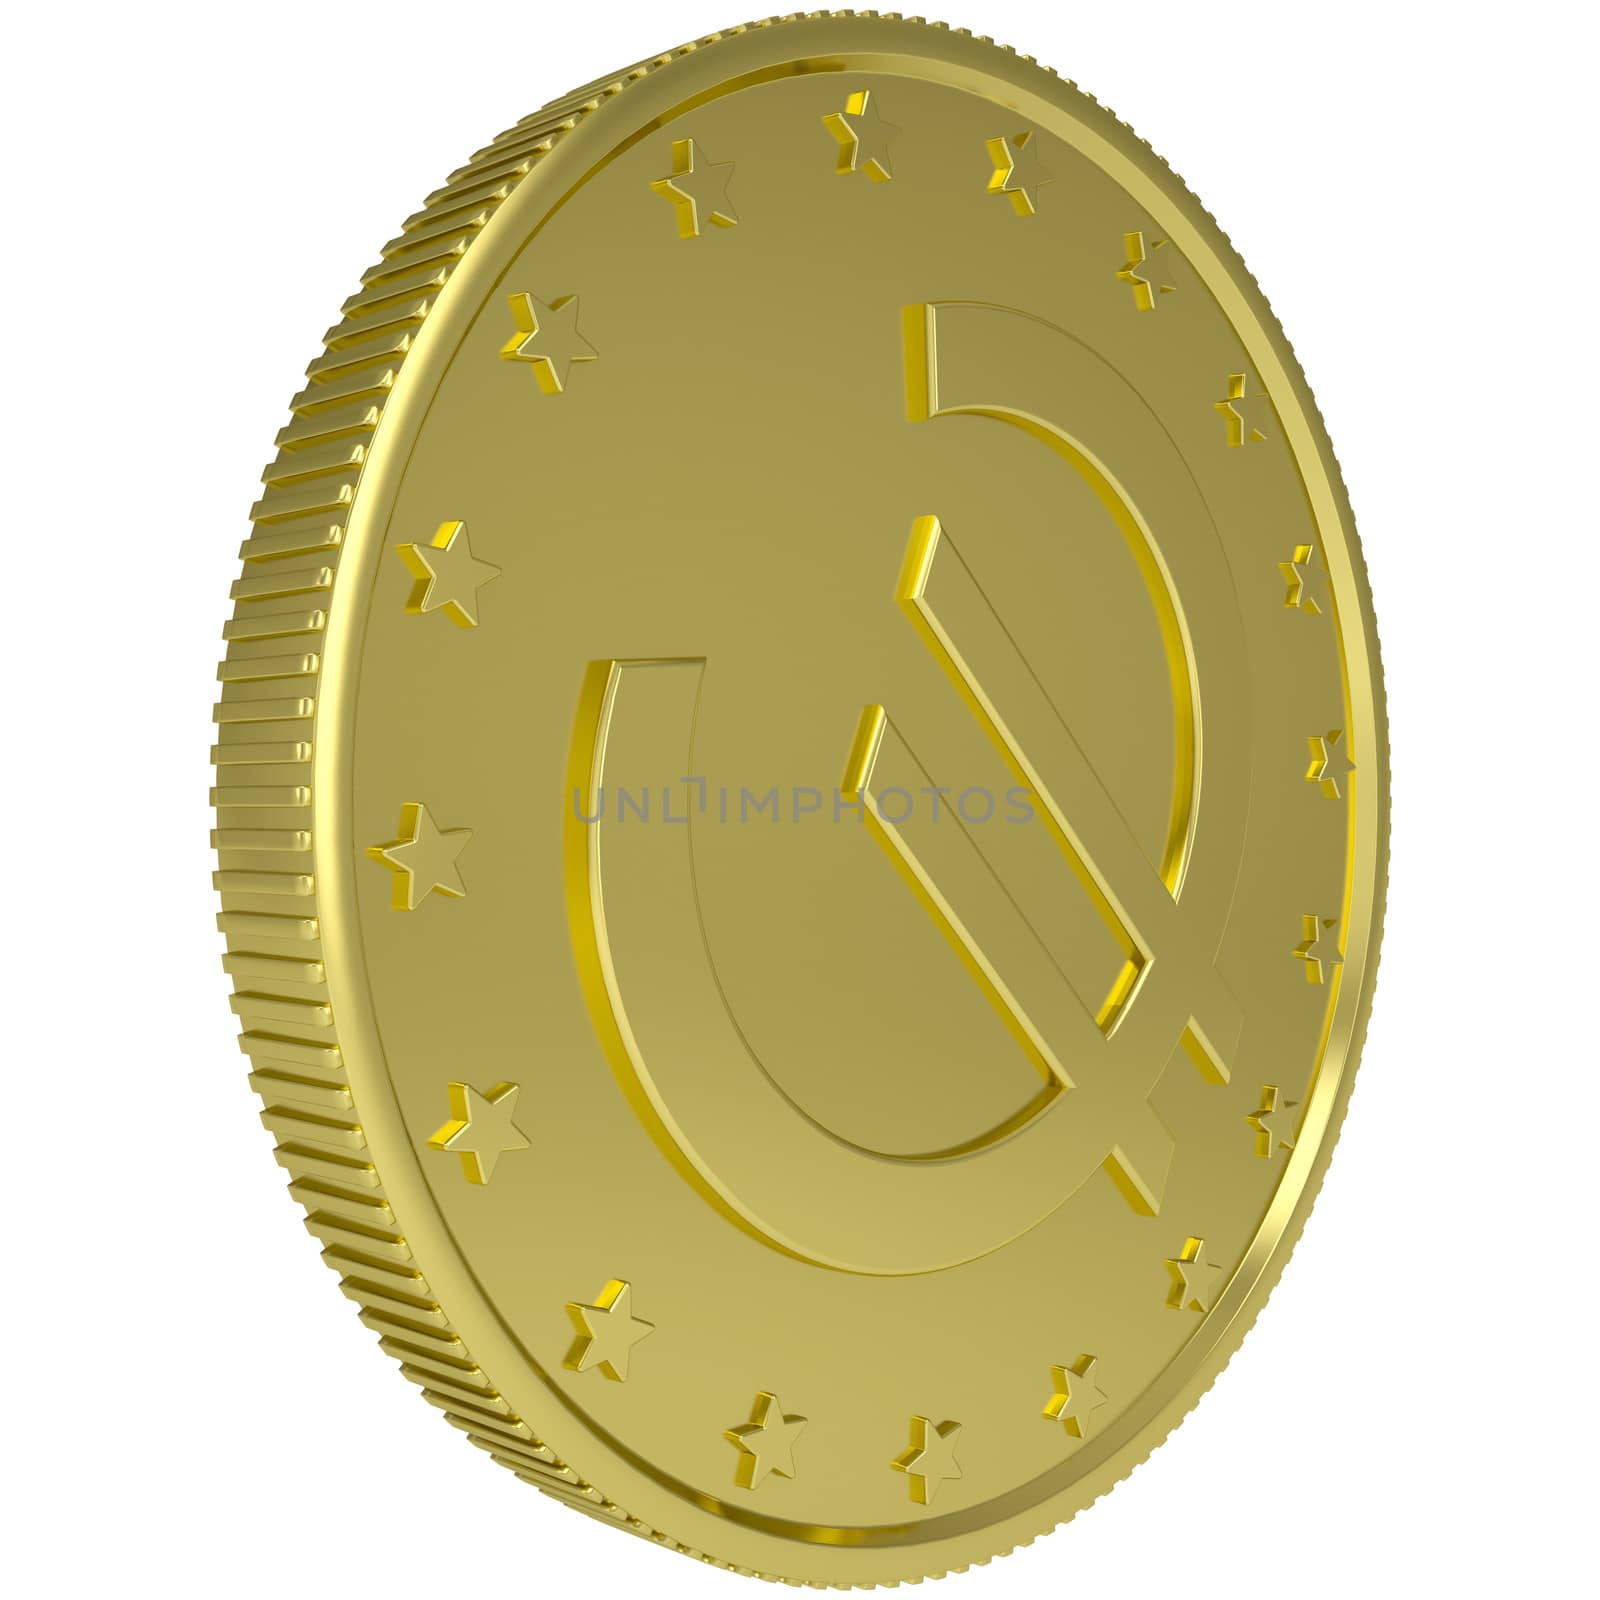 Gold euro. Isolated render on a white background